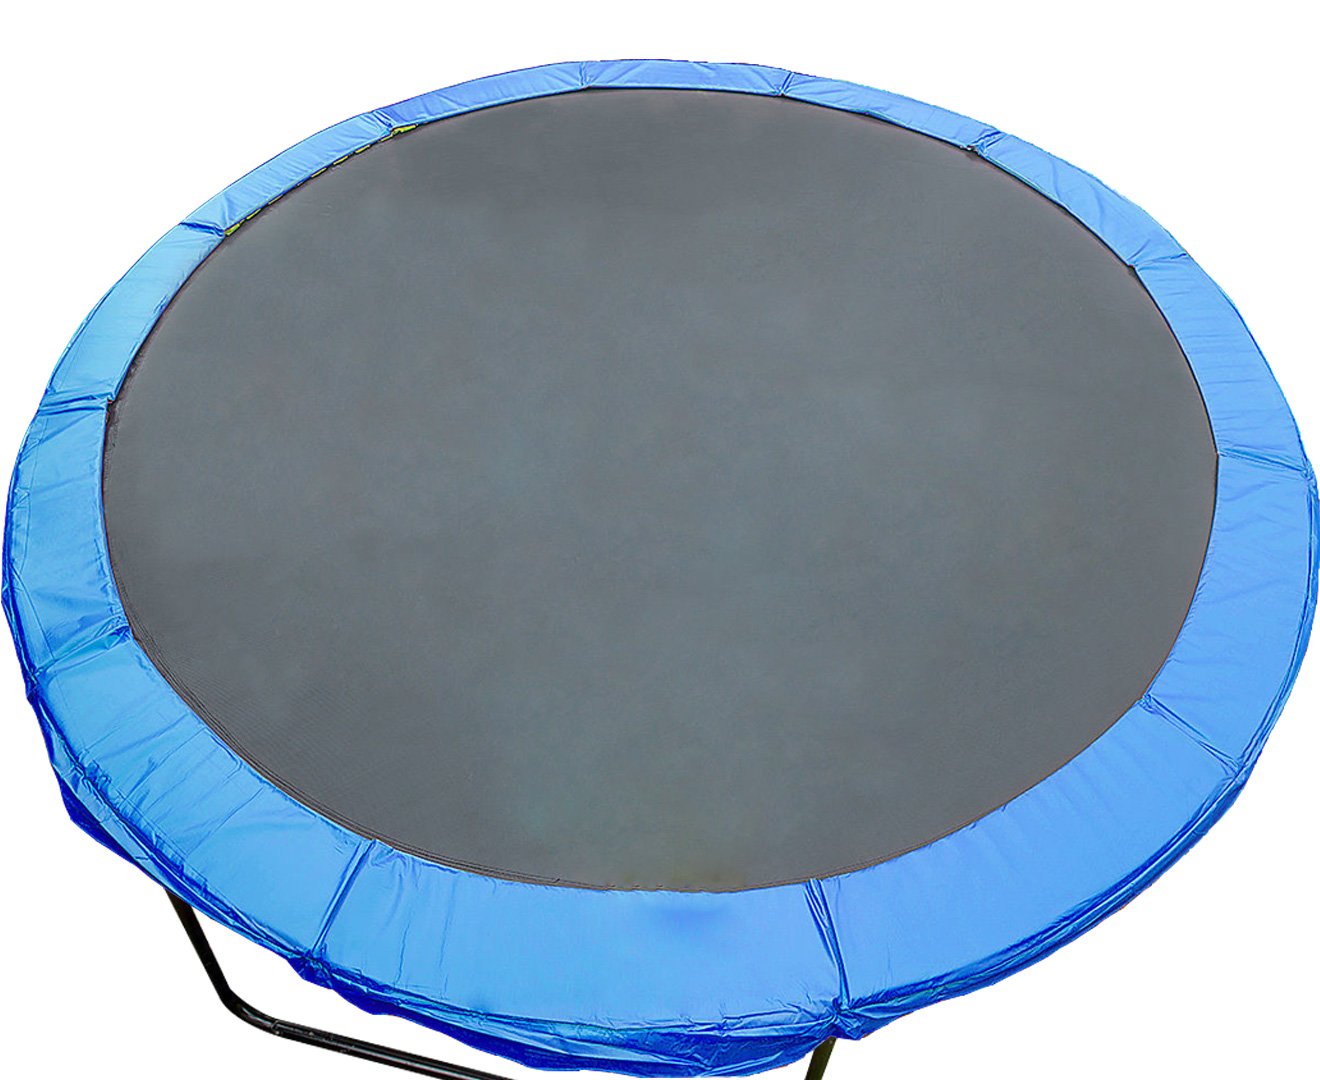 14 ft Replacement Trampoline Safety Spring Pad Cover 2